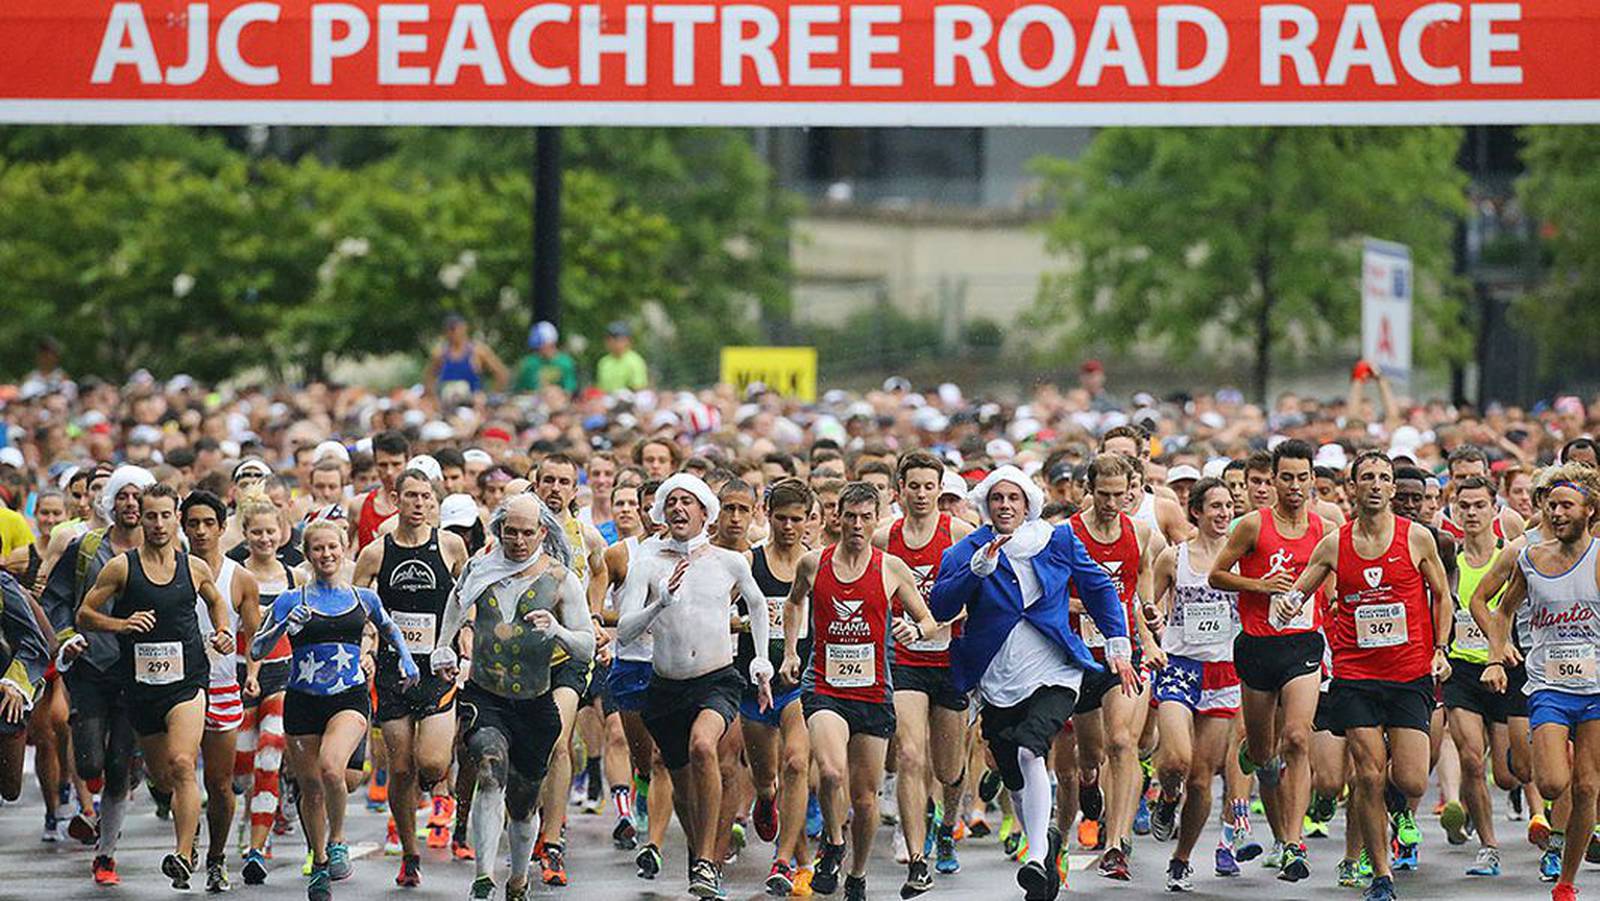 AJC Peachtree Road Race List of road closures planned for the event 97.1 The River